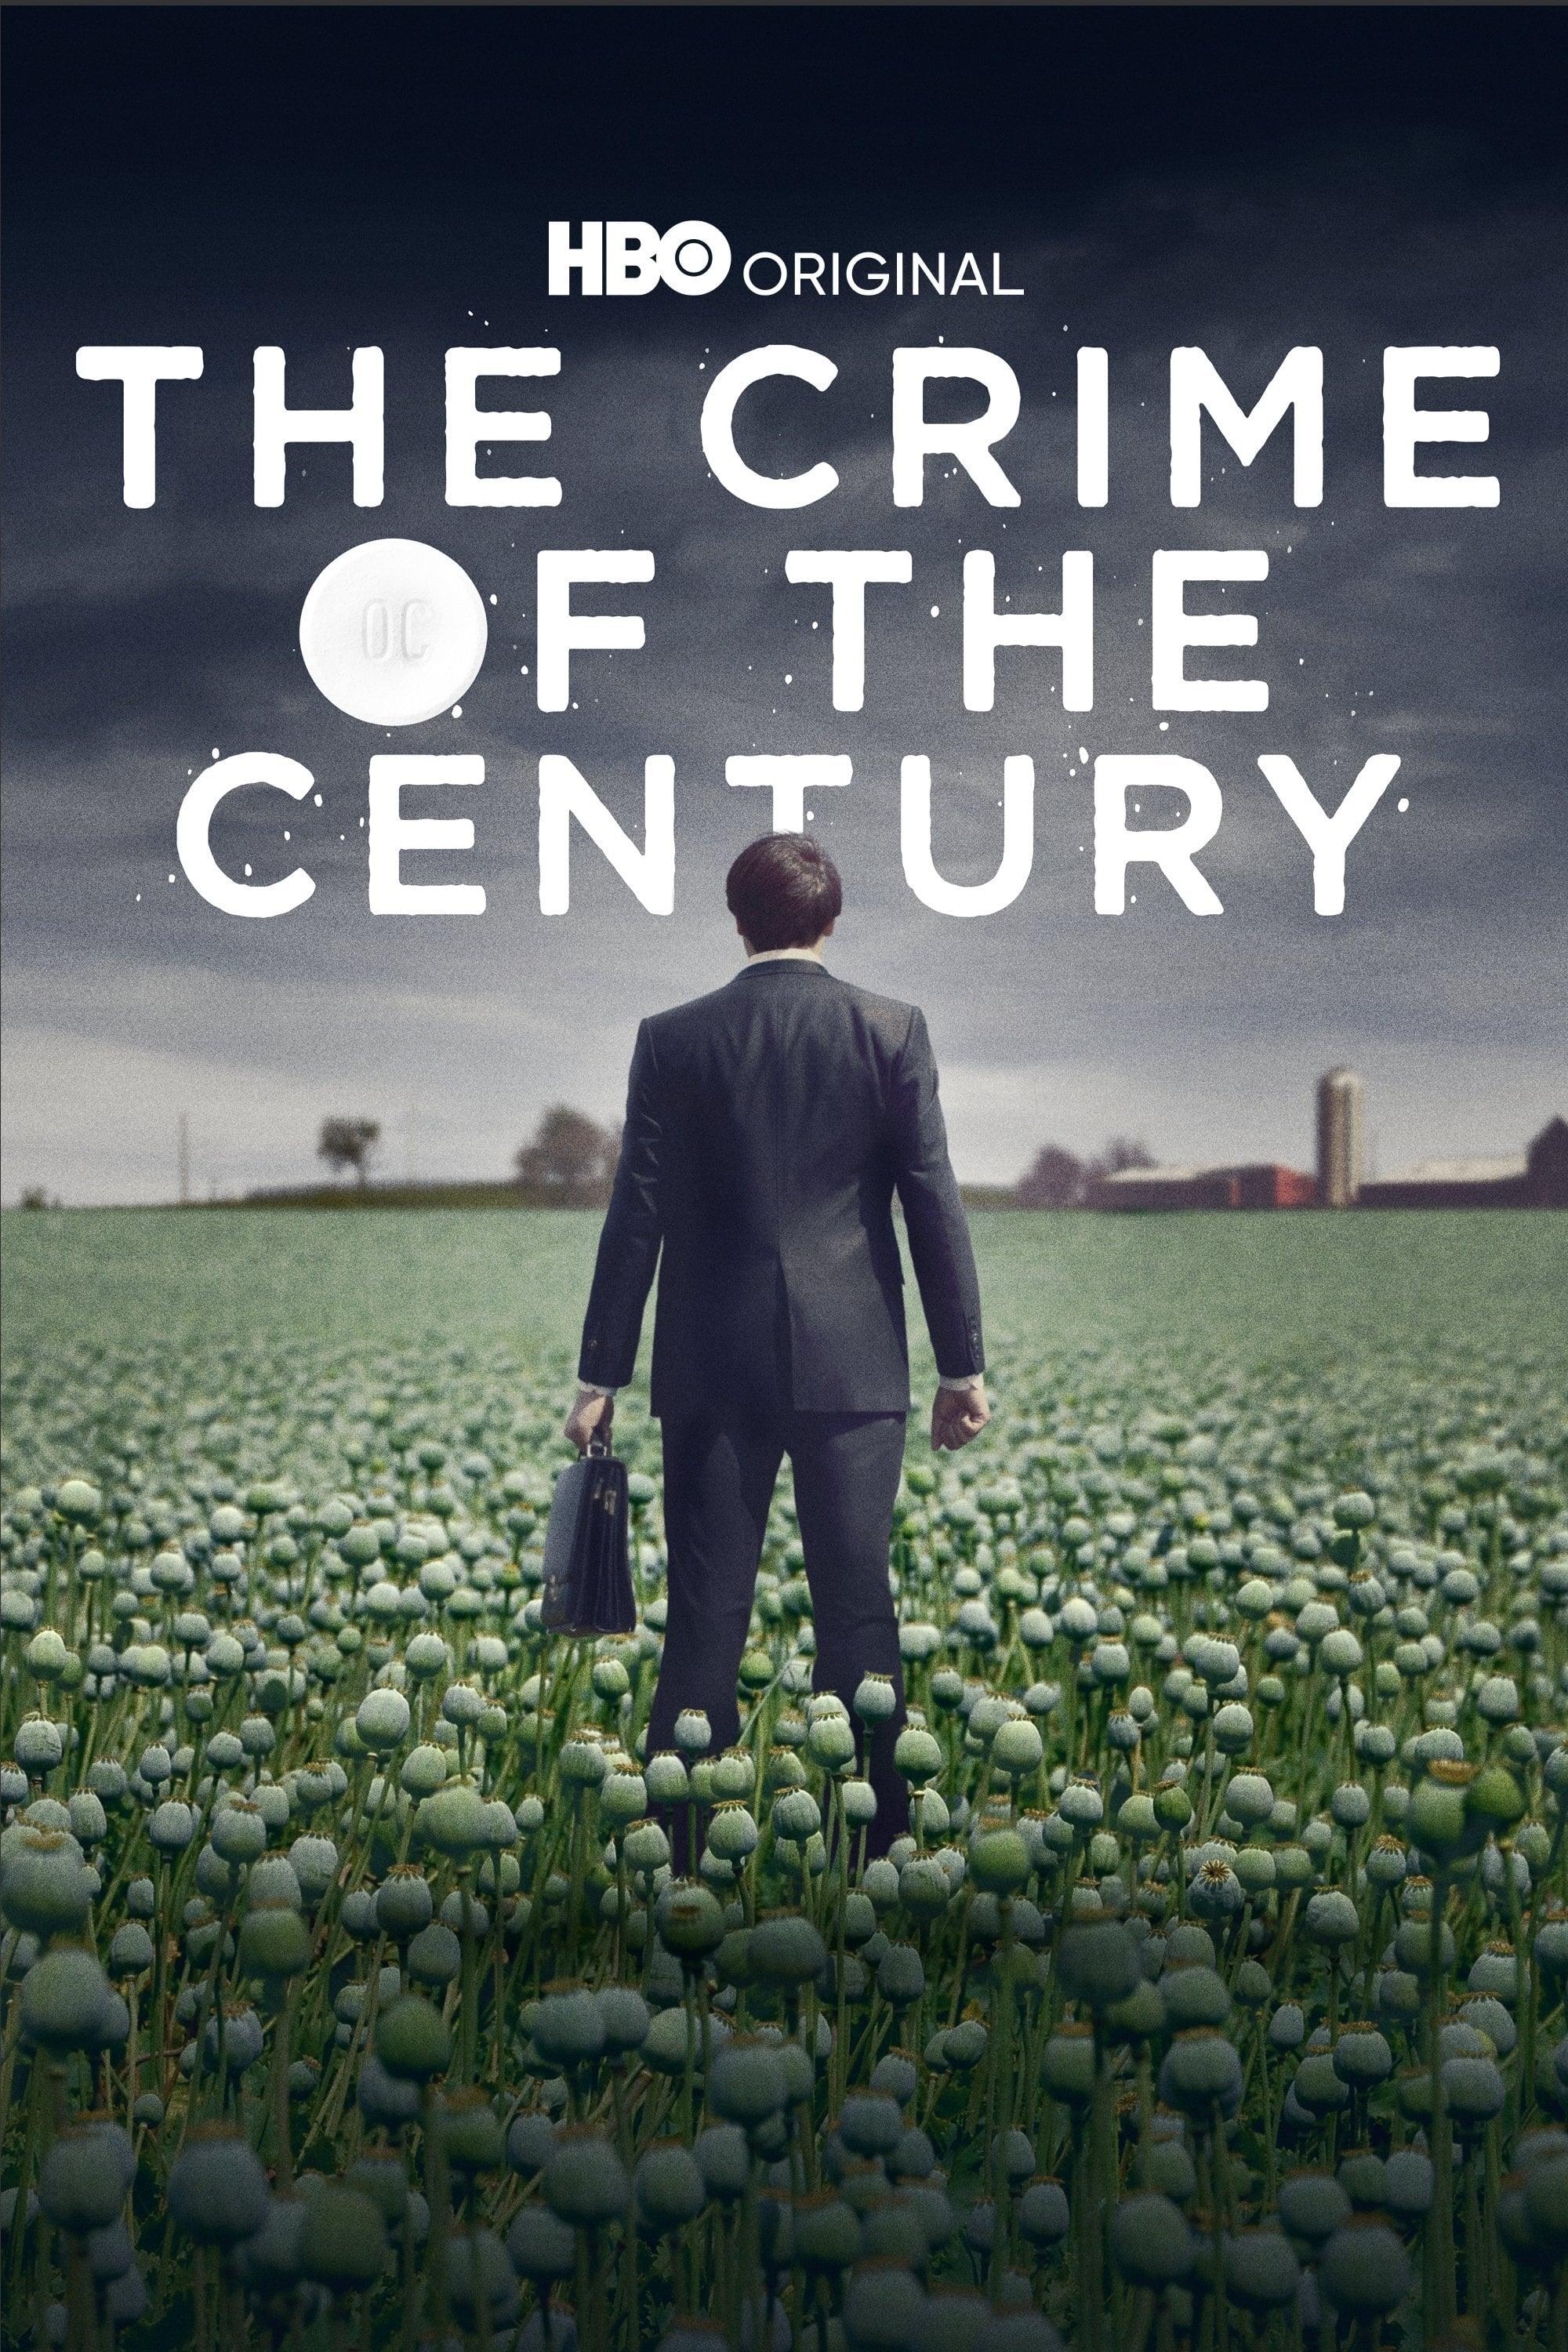 The Crime of the Century poster